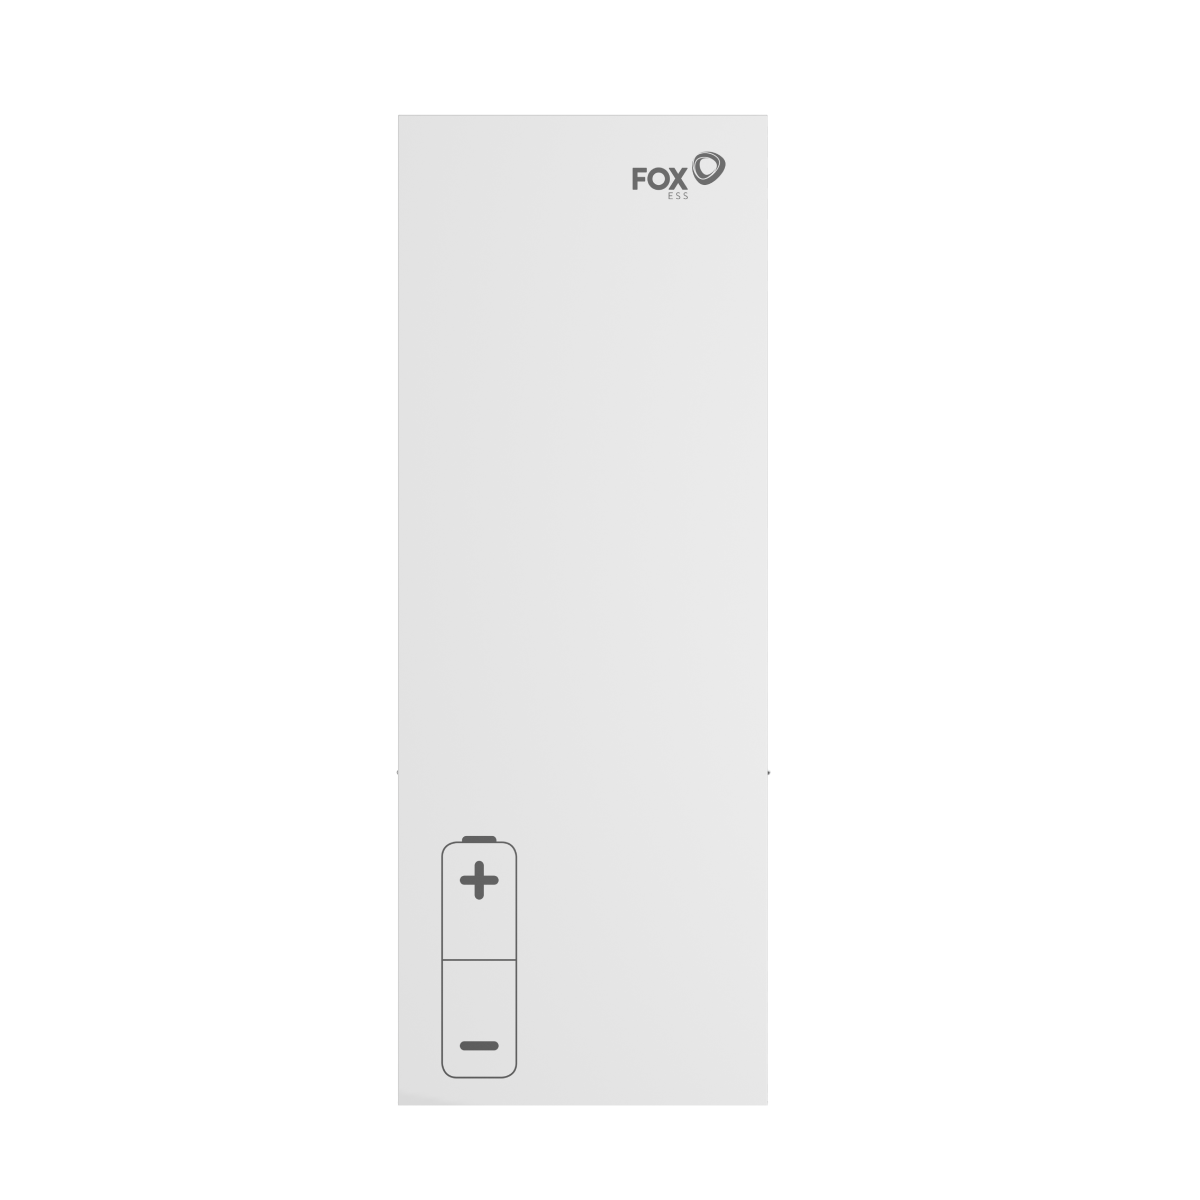 FOX ESS AiO-H3 10kW 10,2kWh All-in-One-Speichersystem 3-phasig inkl. Notstromfunktion inklusive Smarmeter und WiFi Dongle